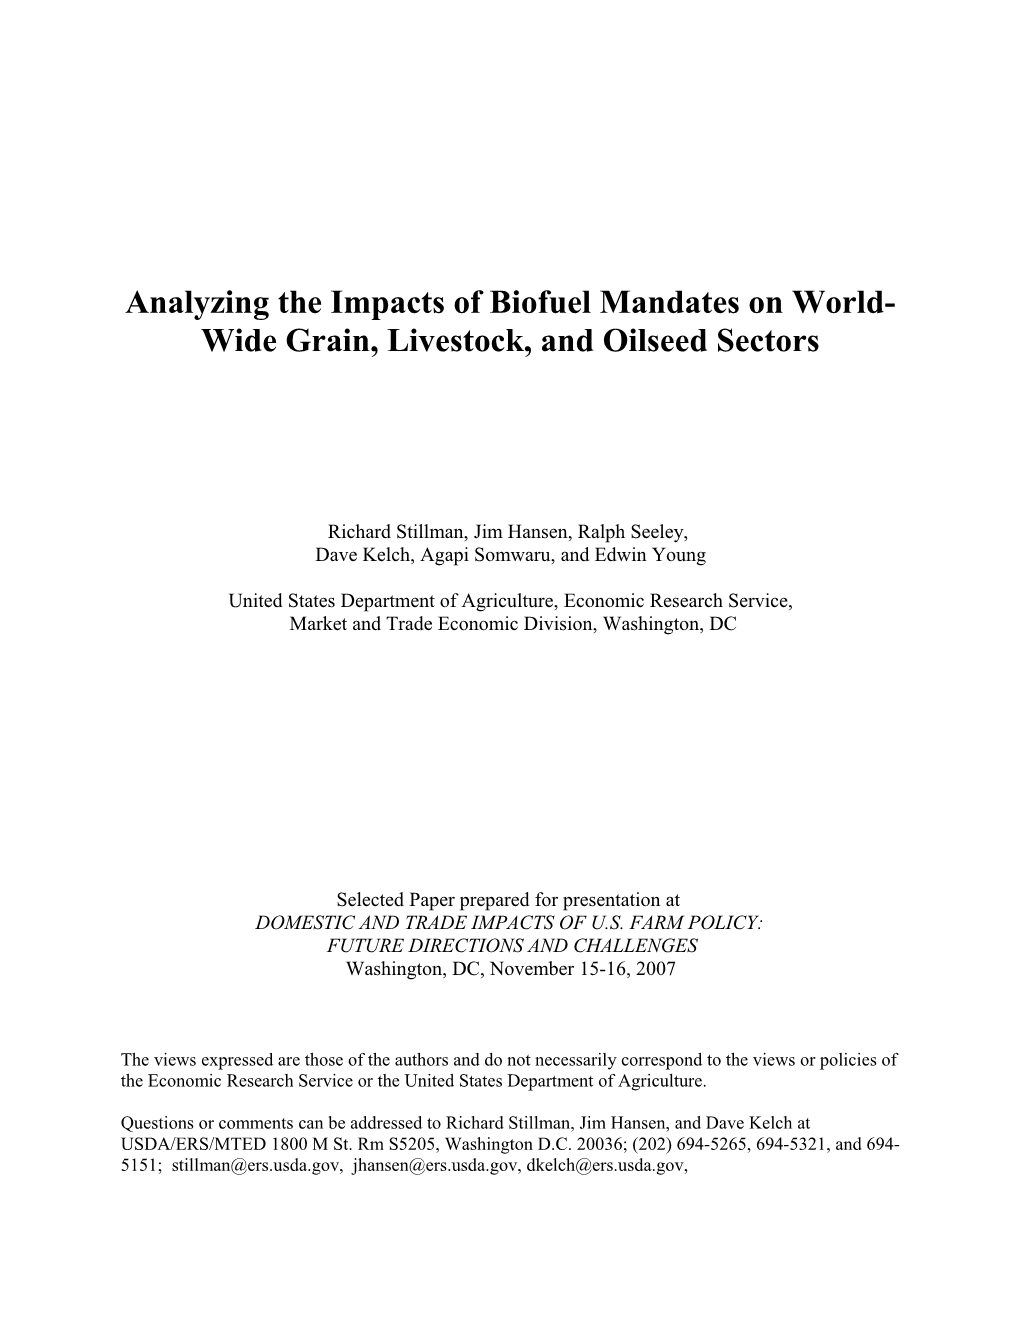 Analyzing the Impacts of Bio-Fuel Mandates on the World Grain, Livestock, and Oilseed Sectors